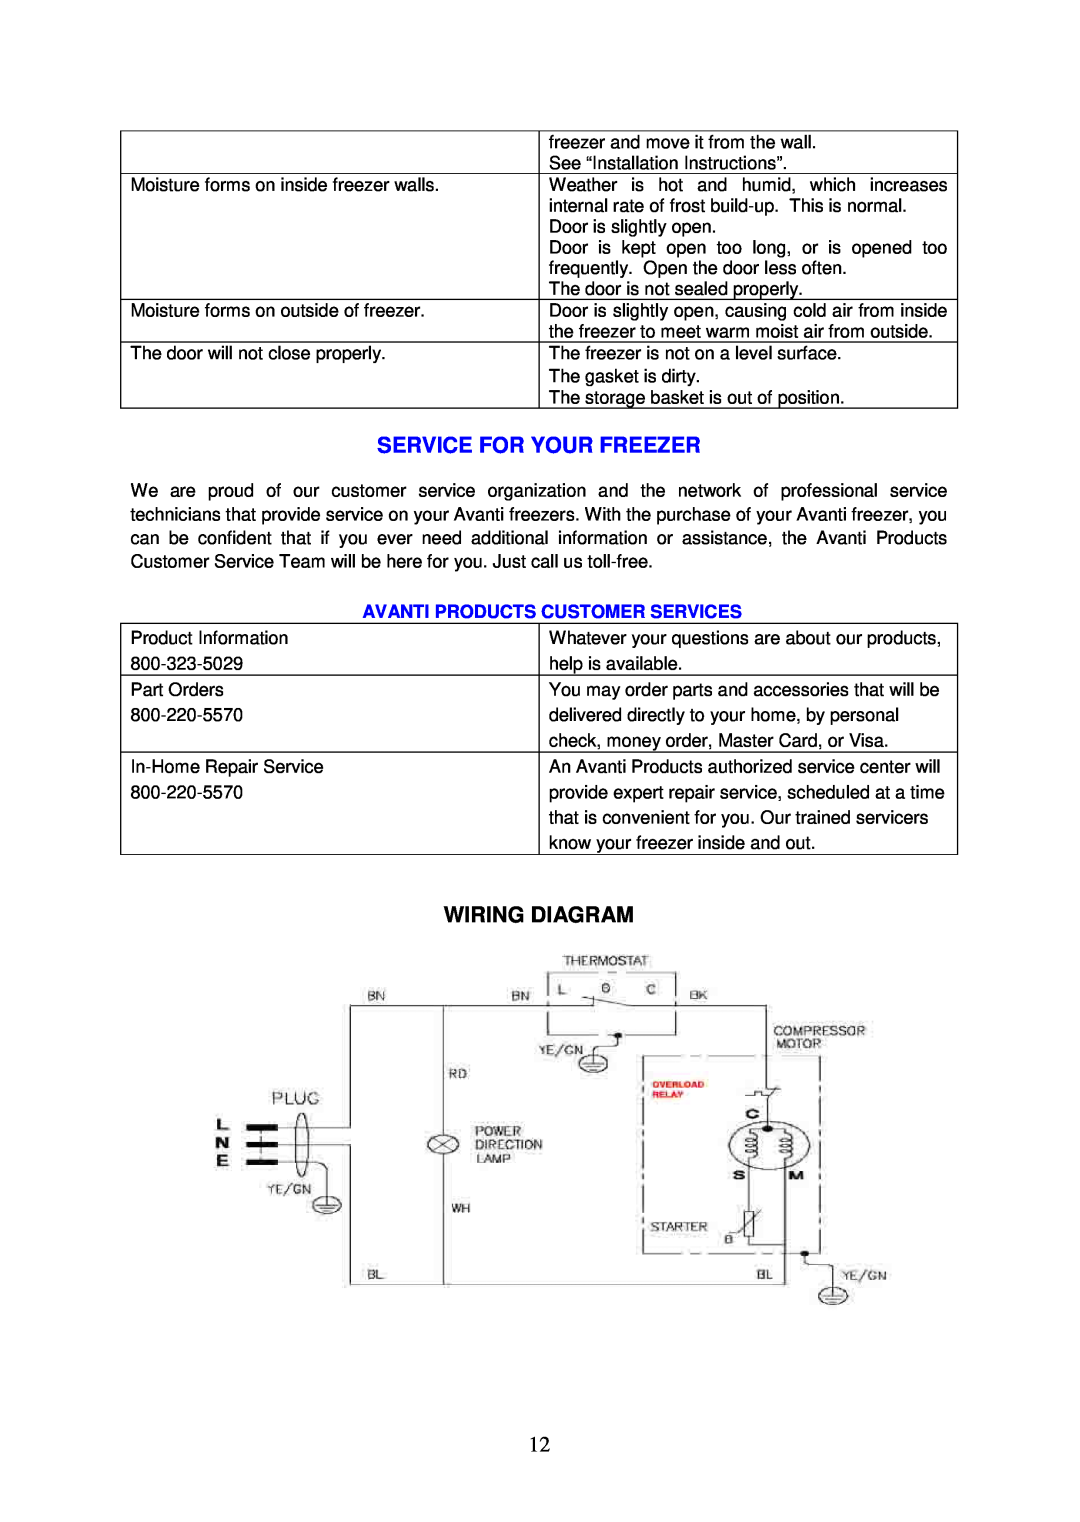 Avanti CF205 instruction manual Service For Your Freezer, Wiring Diagram, Avanti Products Customer Services 